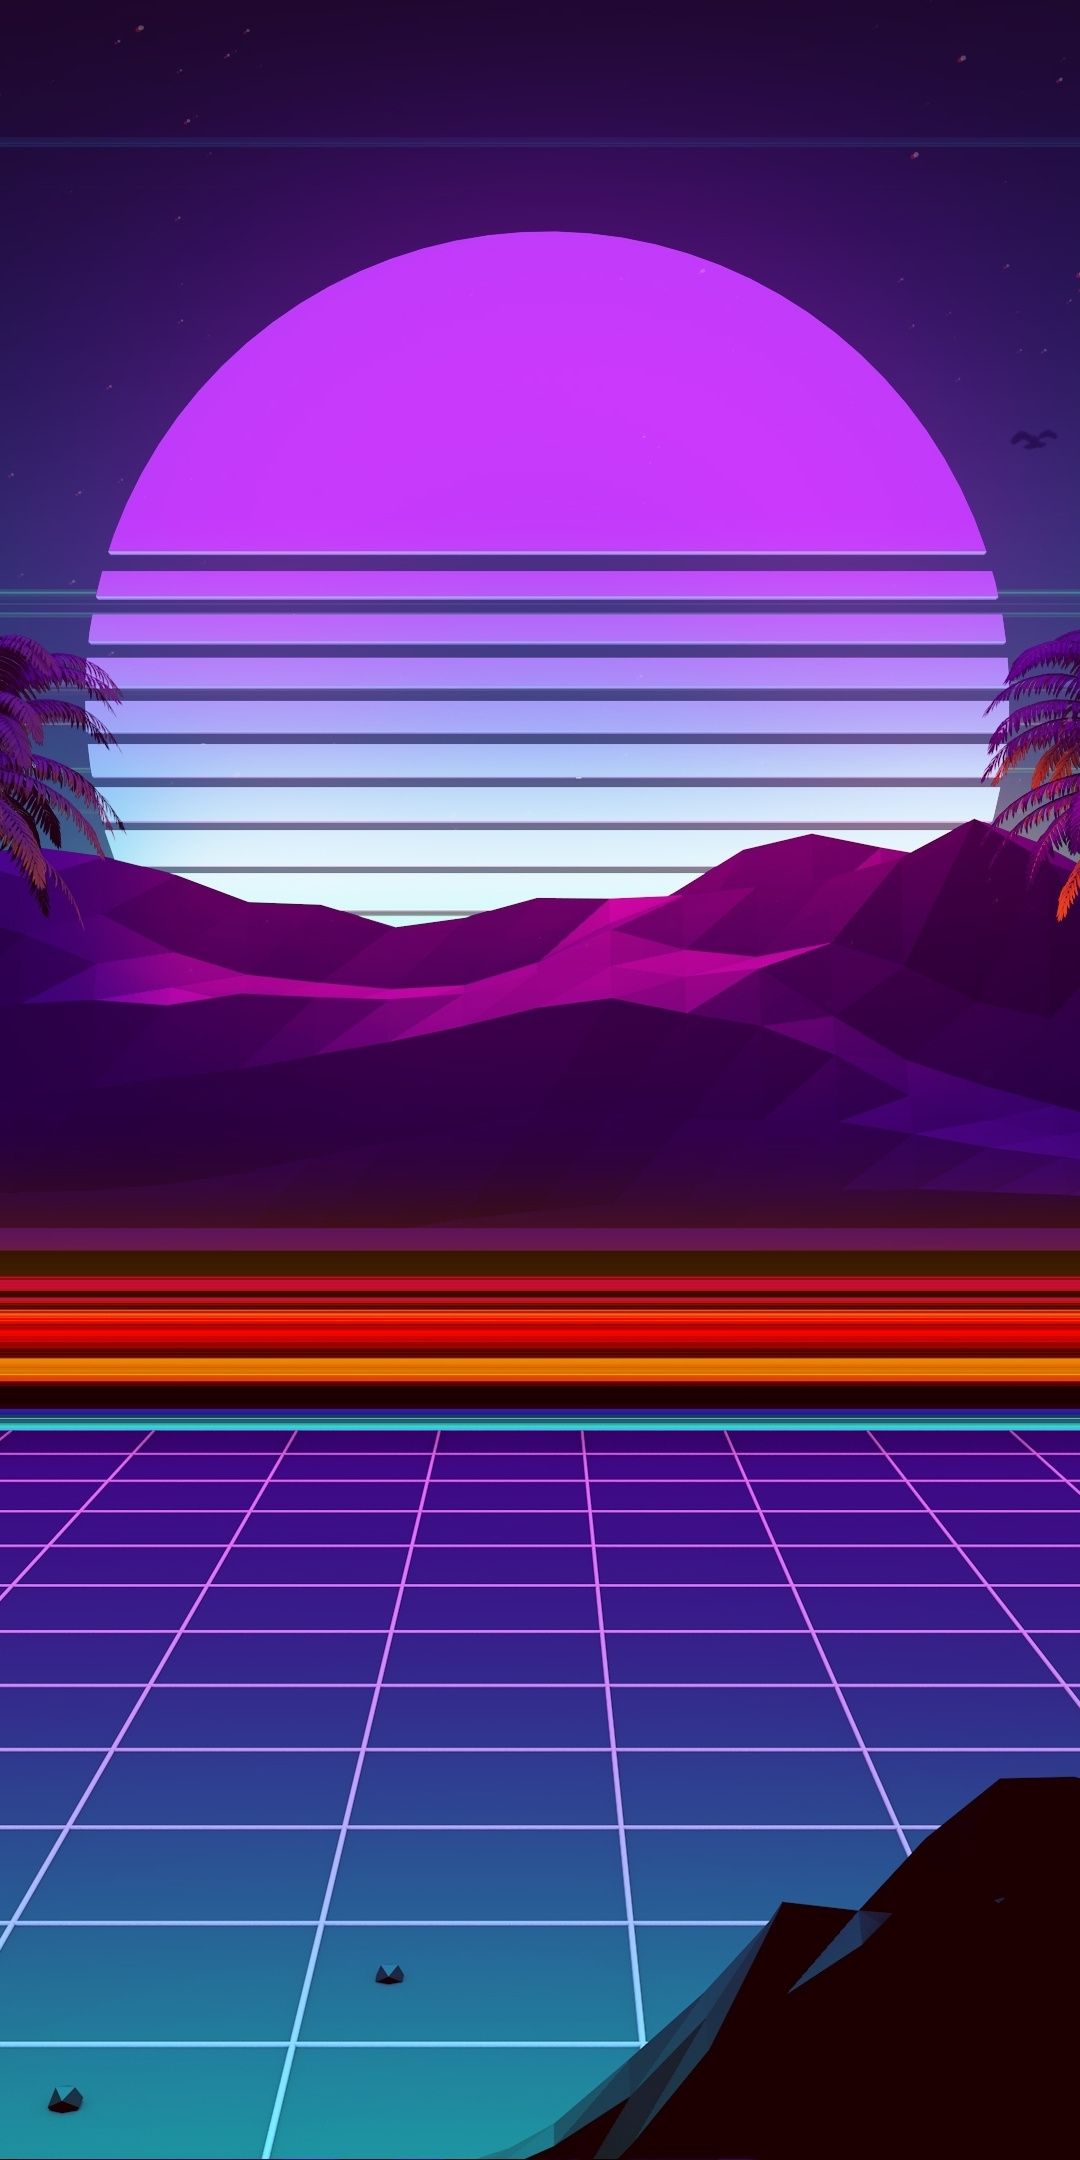 Night, moonlight, mountain, Synthwave and Retrowave